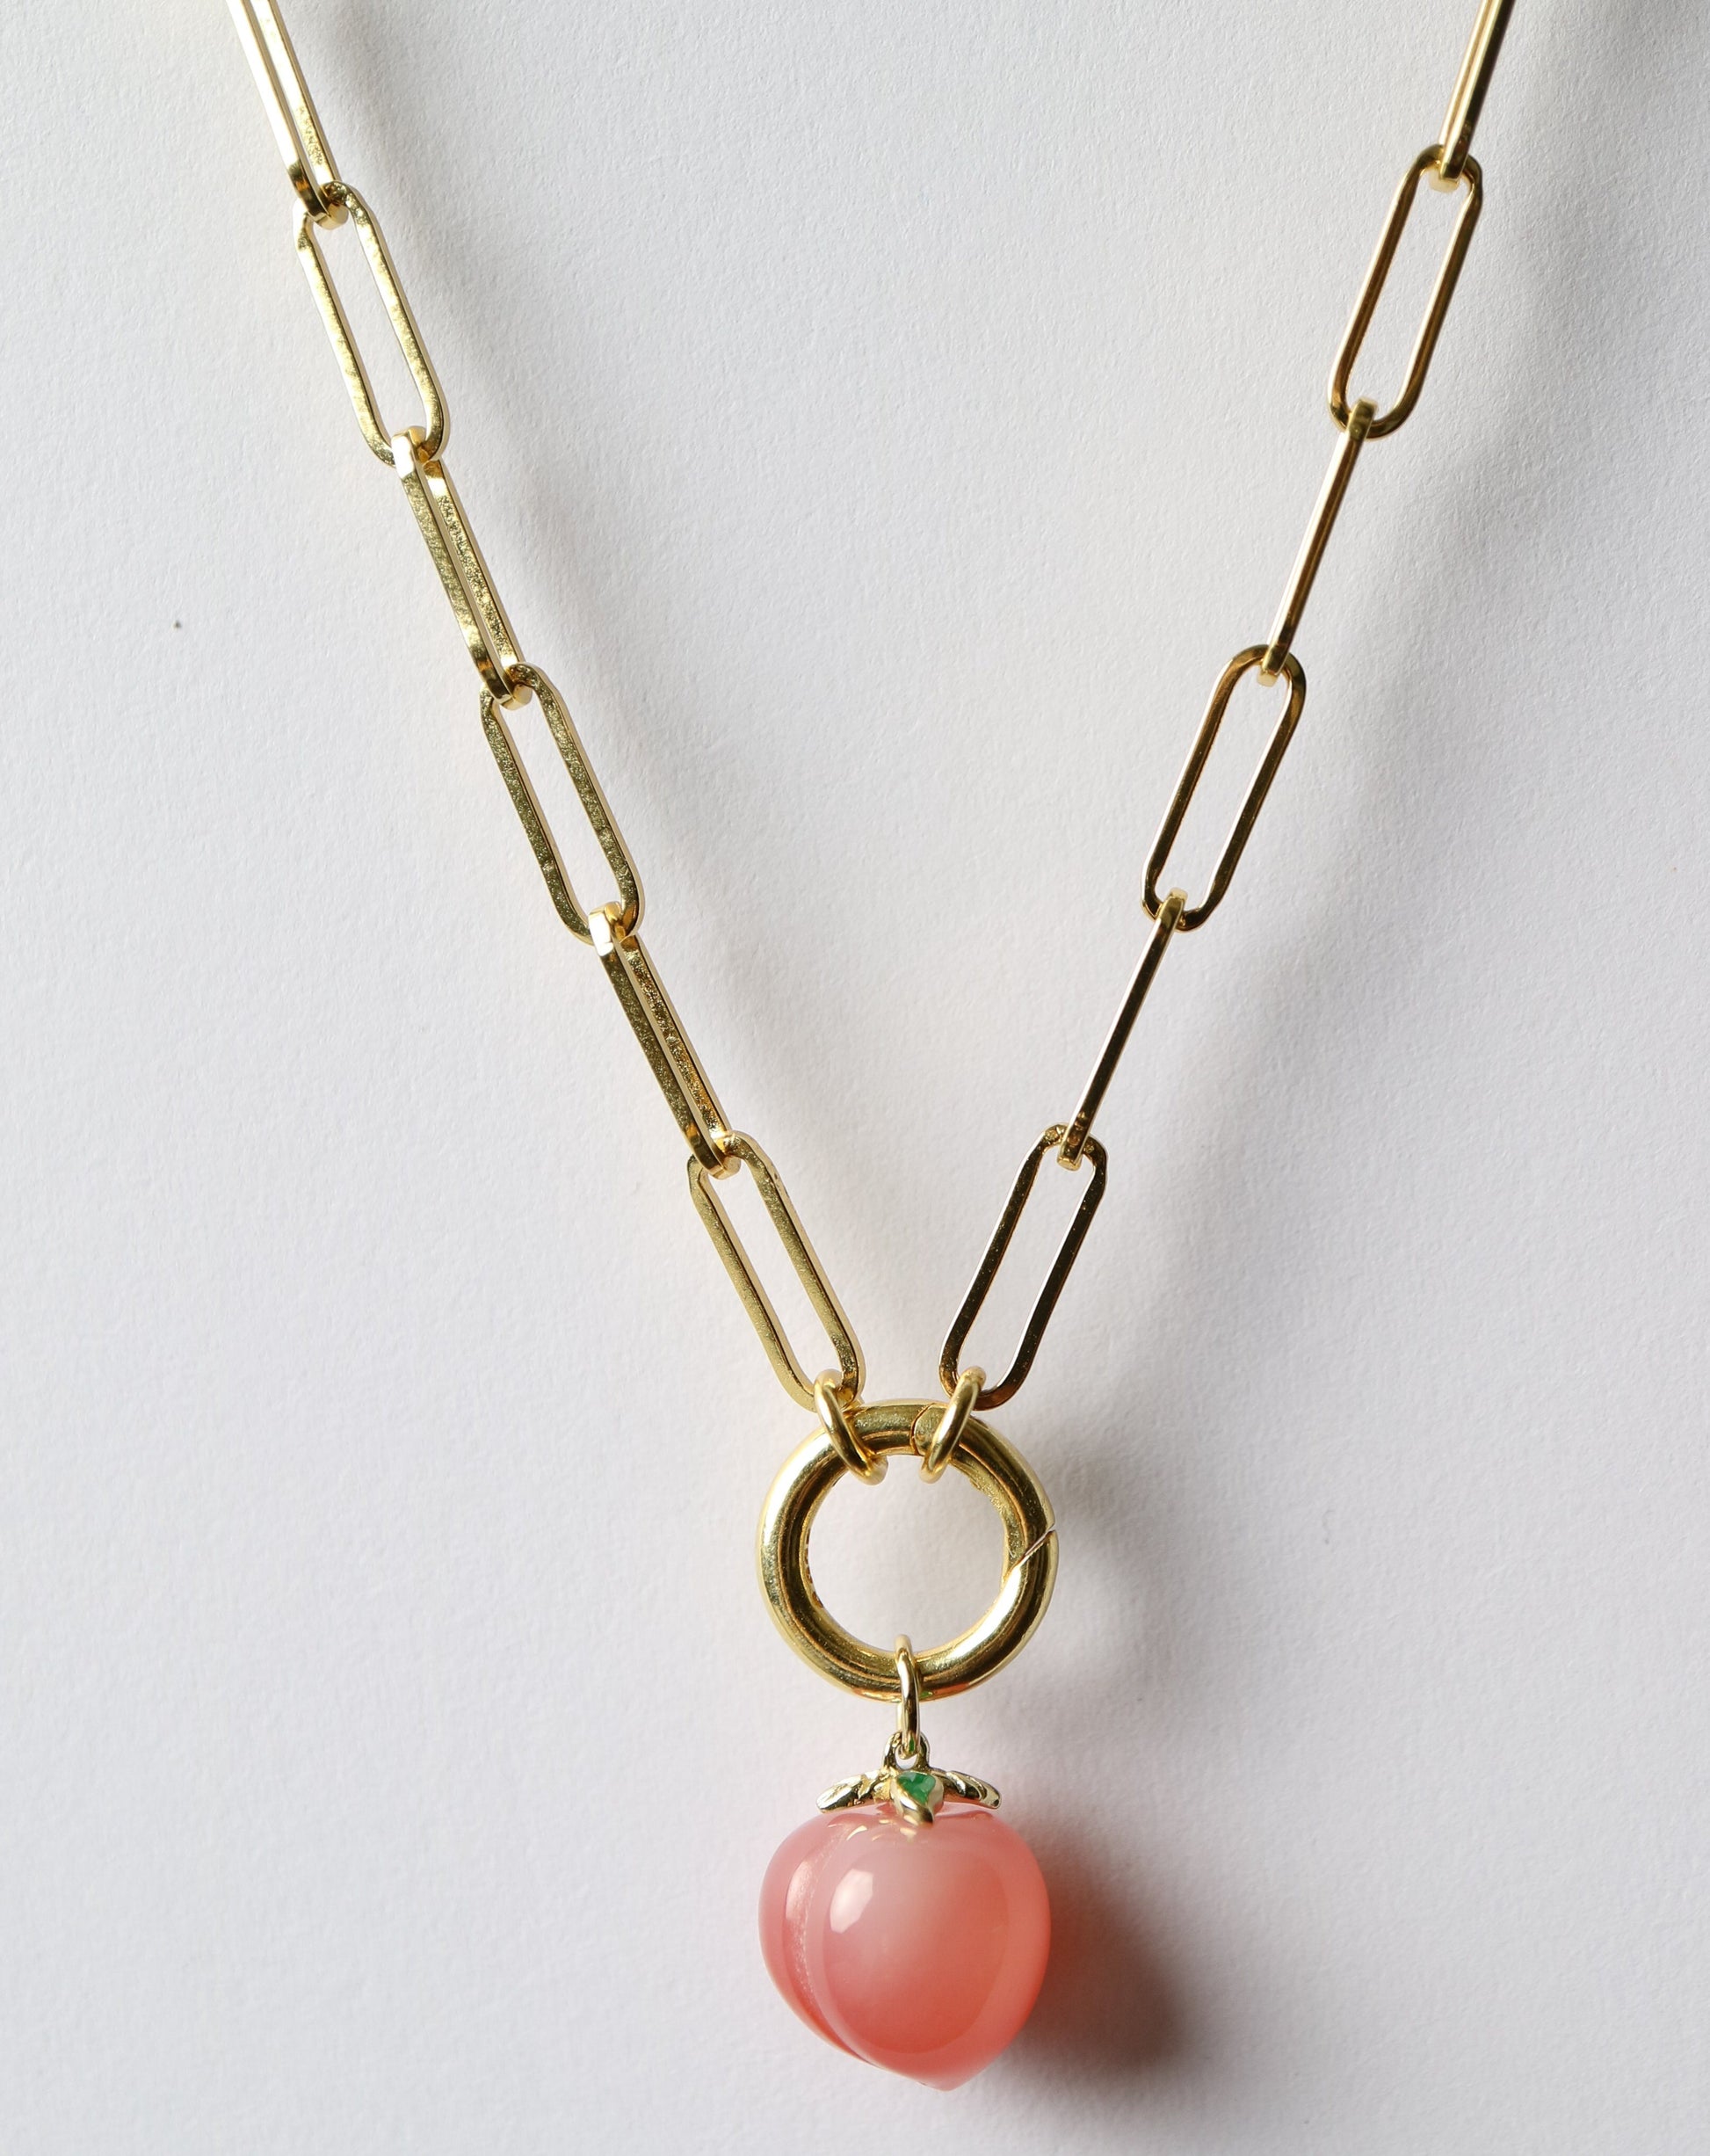 Gold Paperclip Necklace with peach charm